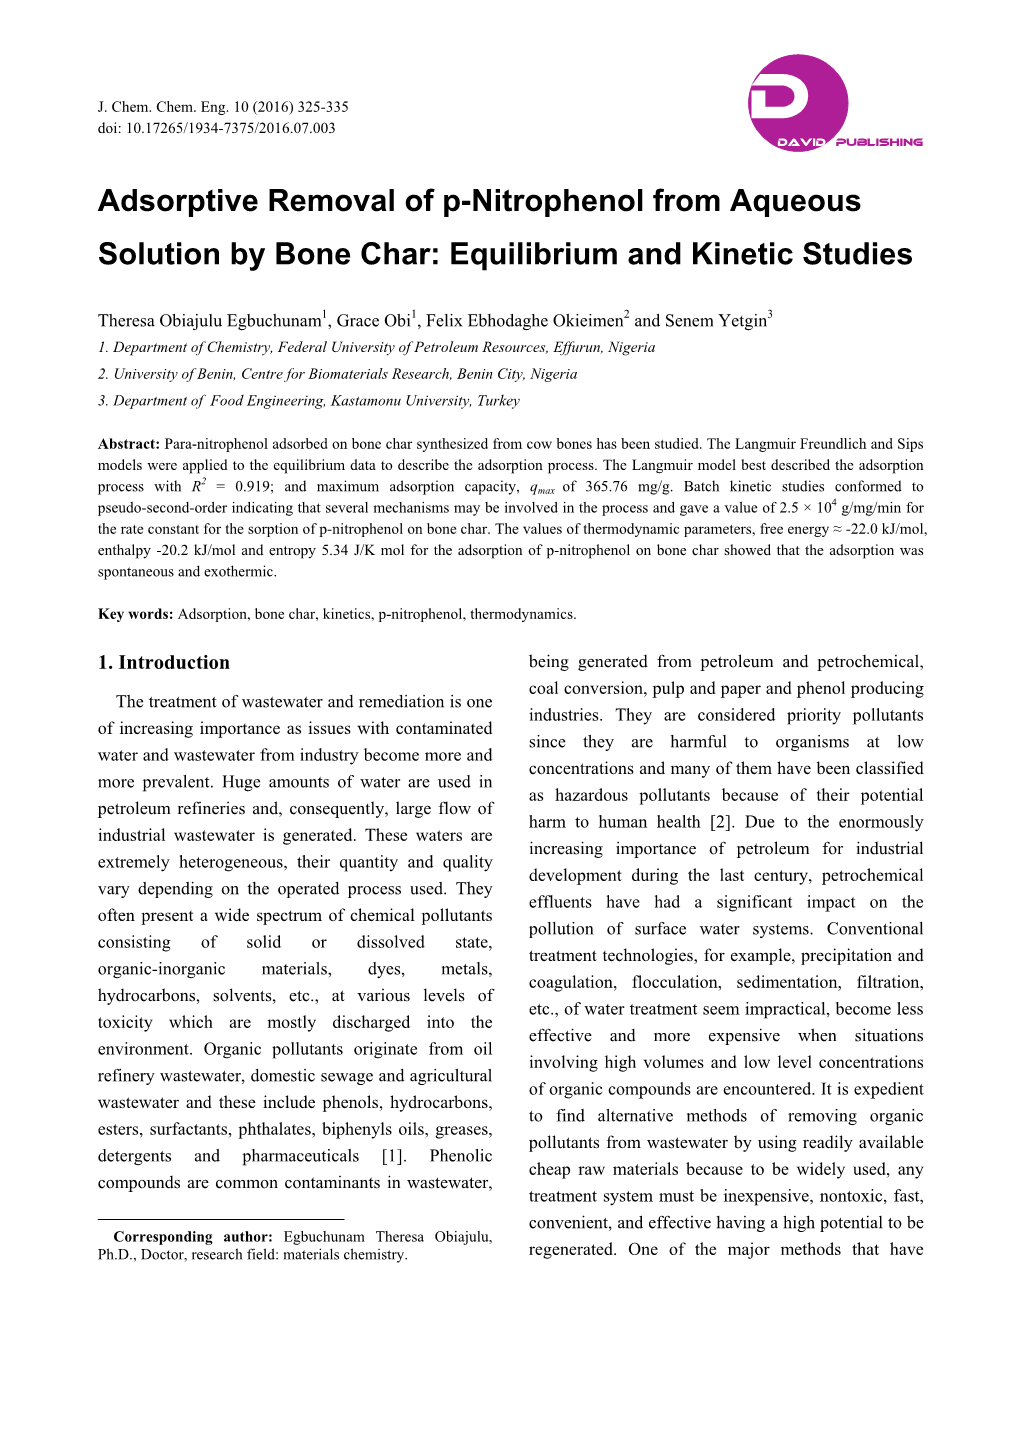 Adsorptive Removal of P-Nitrophenol from Aqueous Solution by Bone Char: Equilibrium and Kinetic Studies